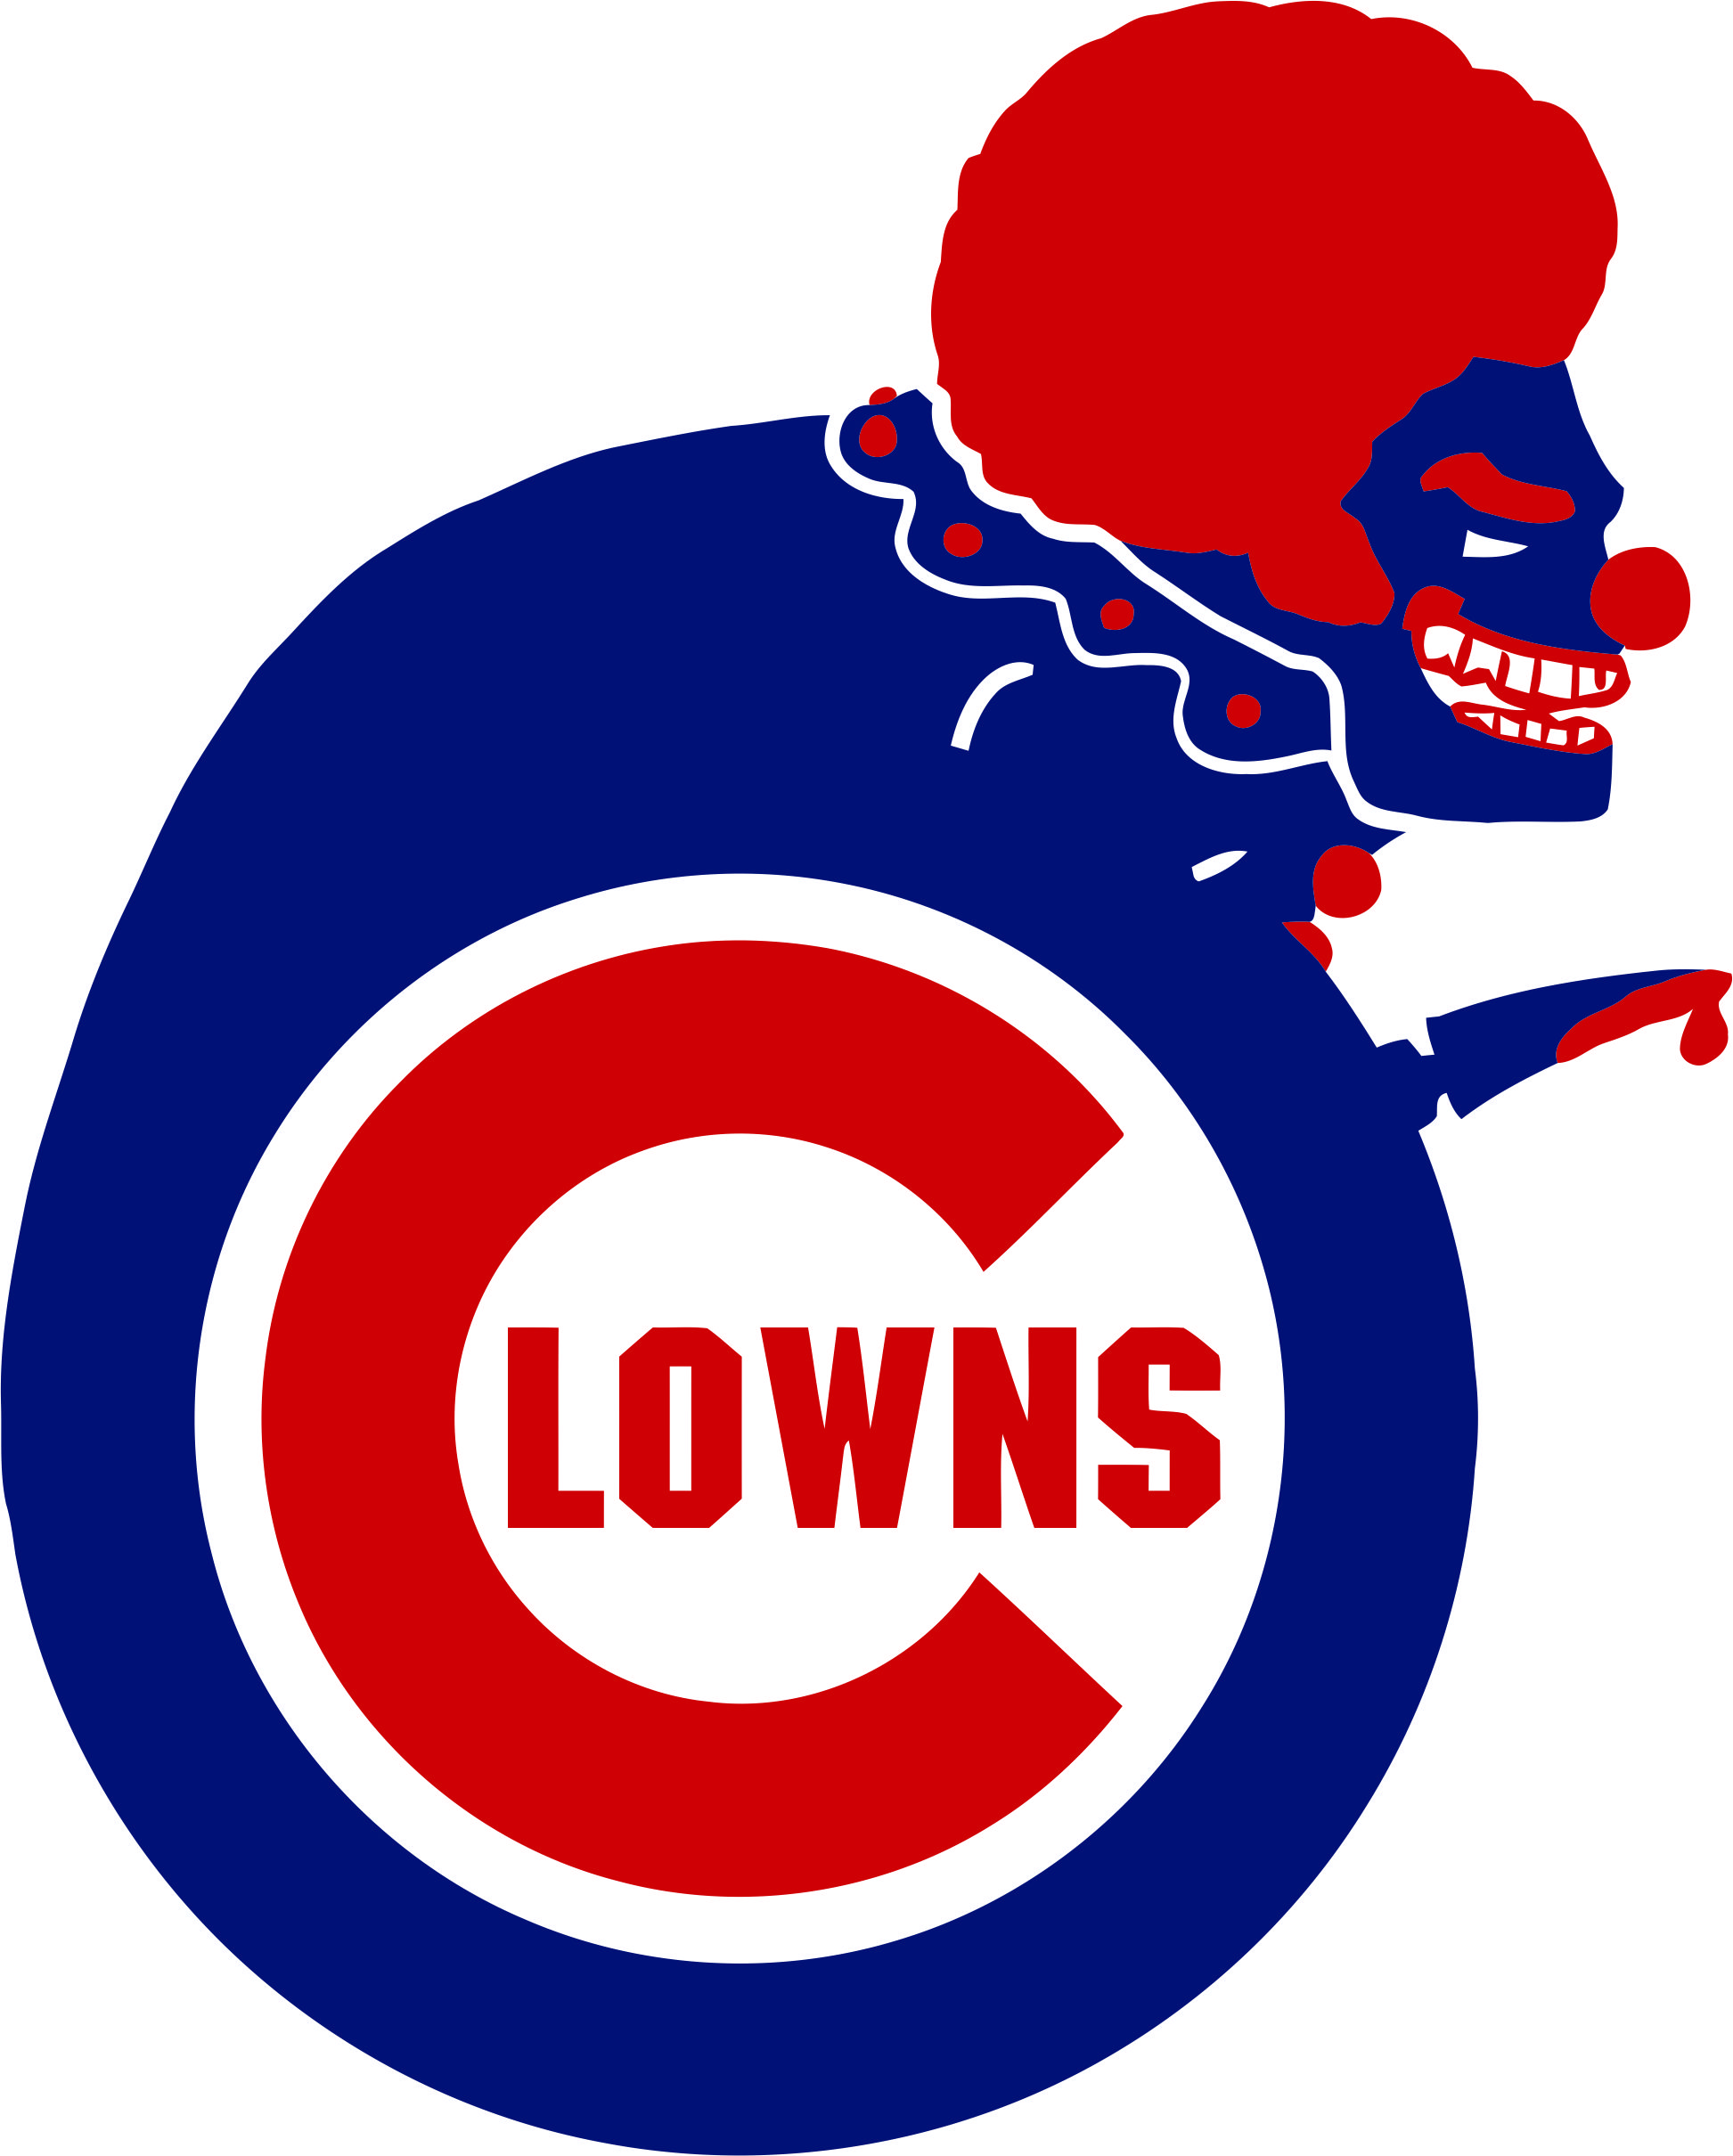 Chicago Cubs Lowns Logo iron on transfers